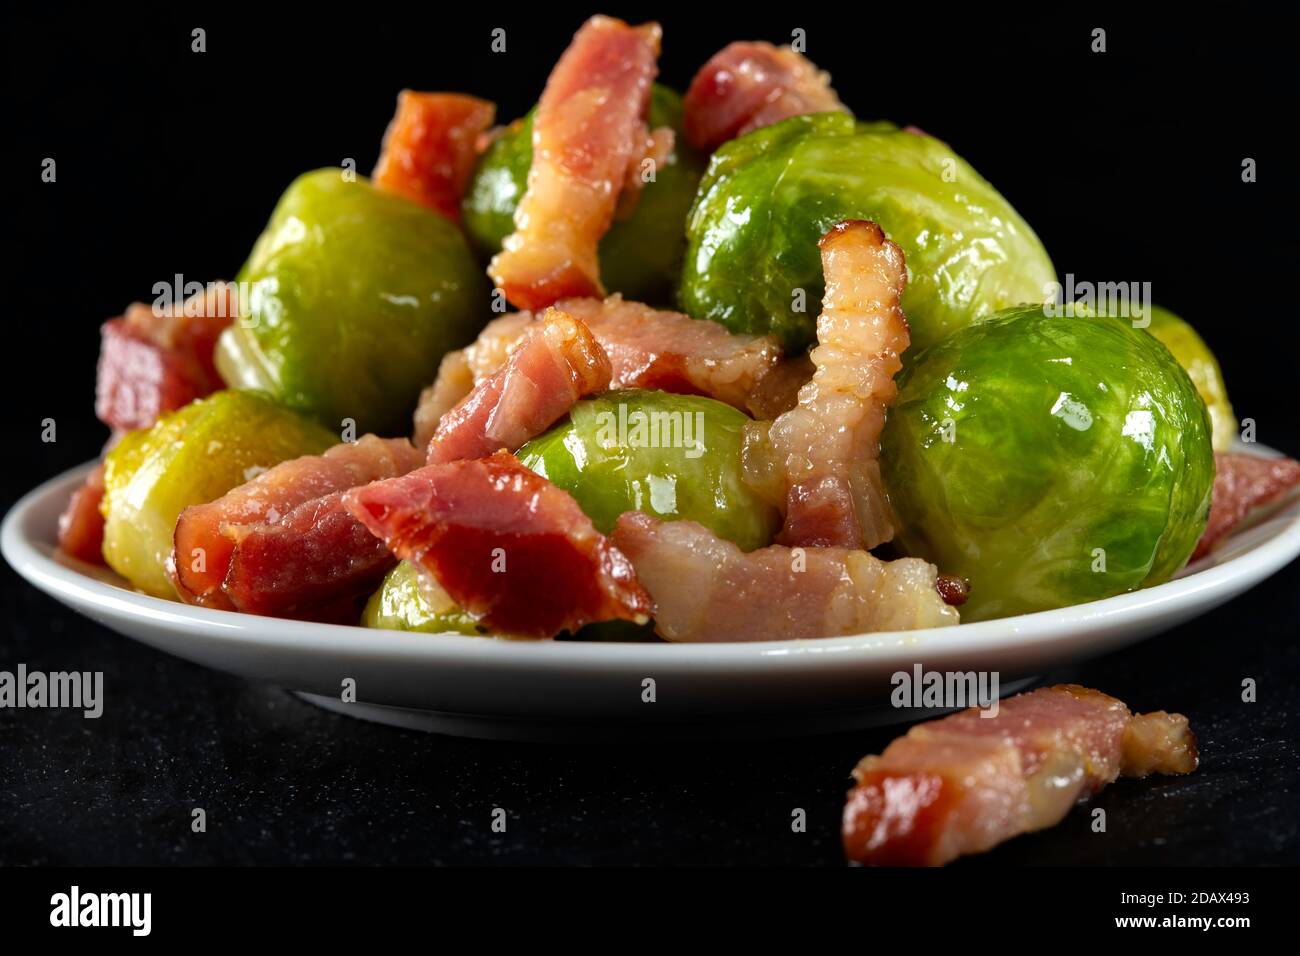 Fried brussels sprouts with bacon on plate Stock Photo